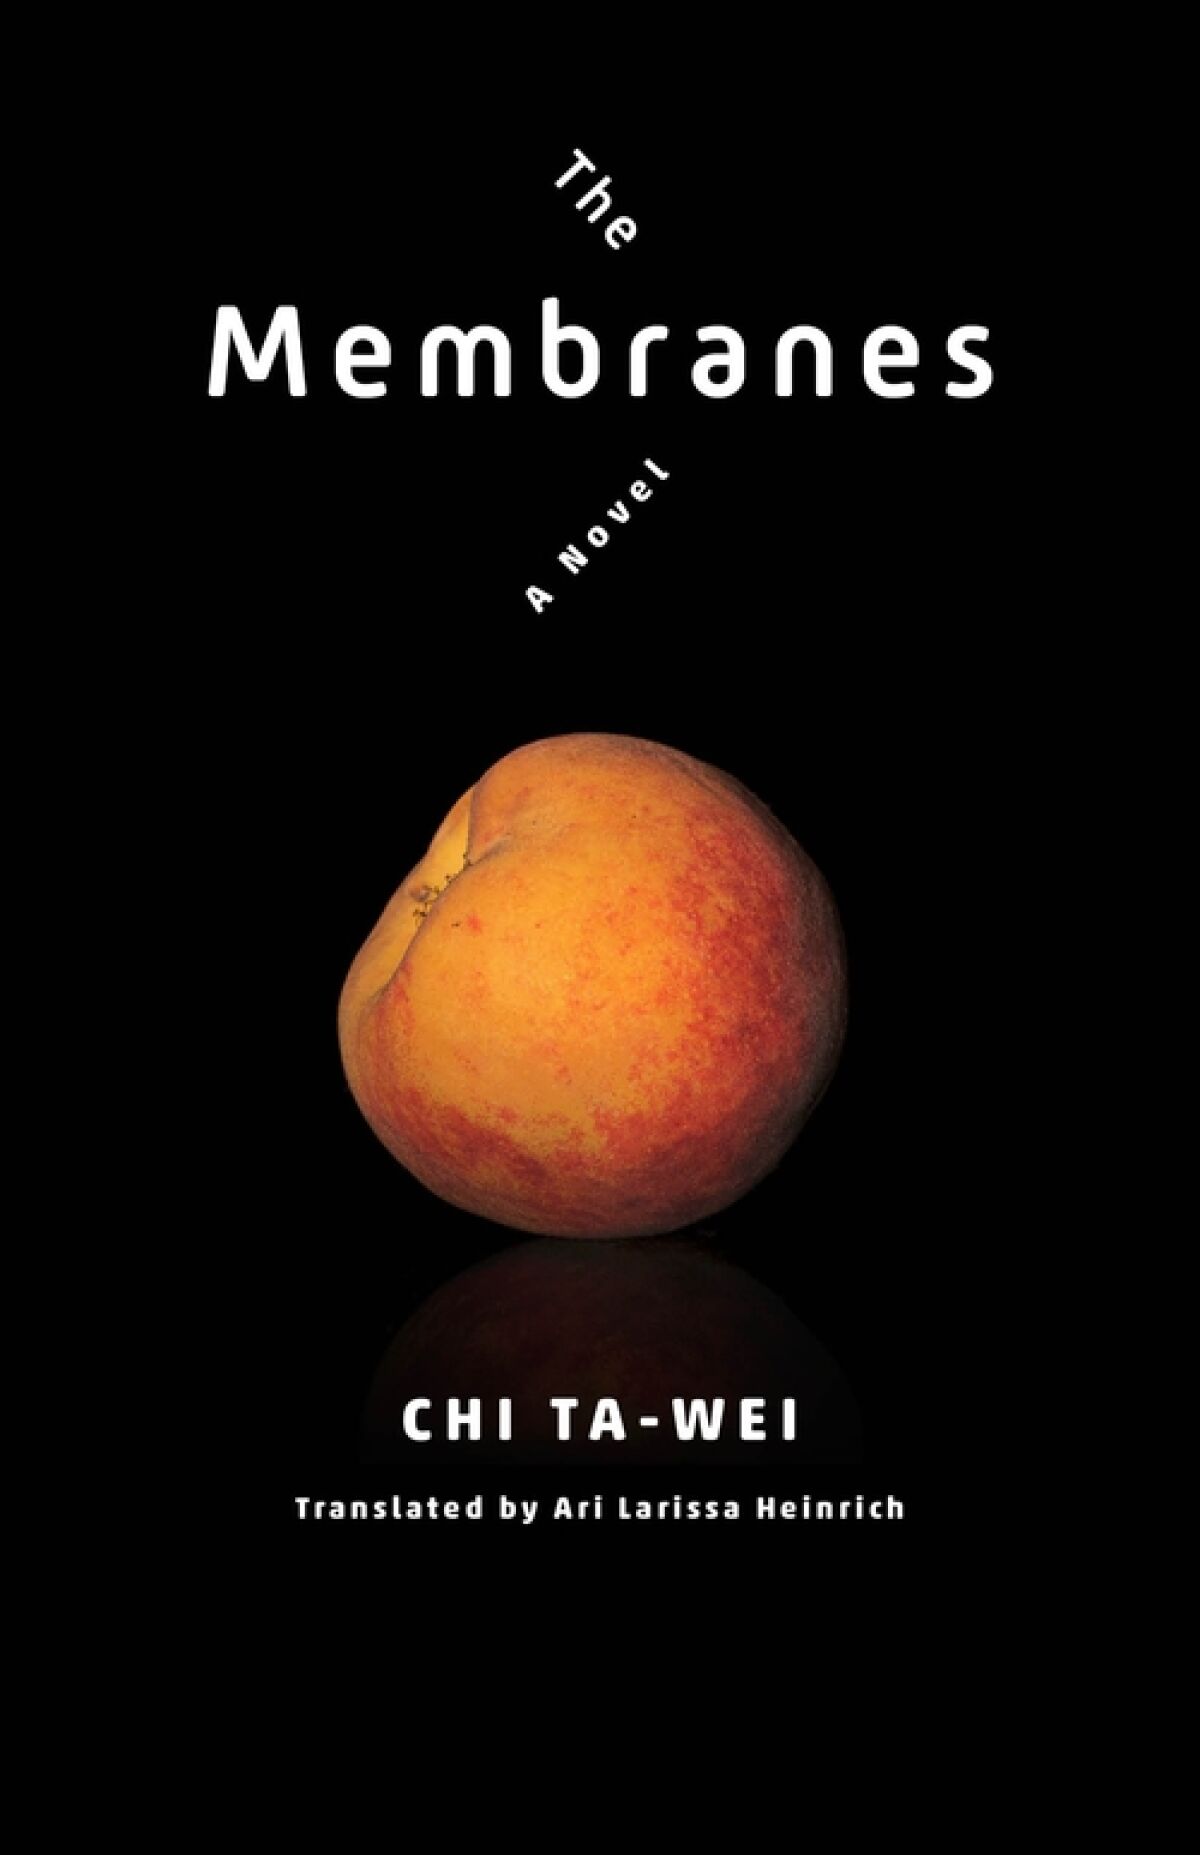 "The Membranes," by Chi Ta-wei.